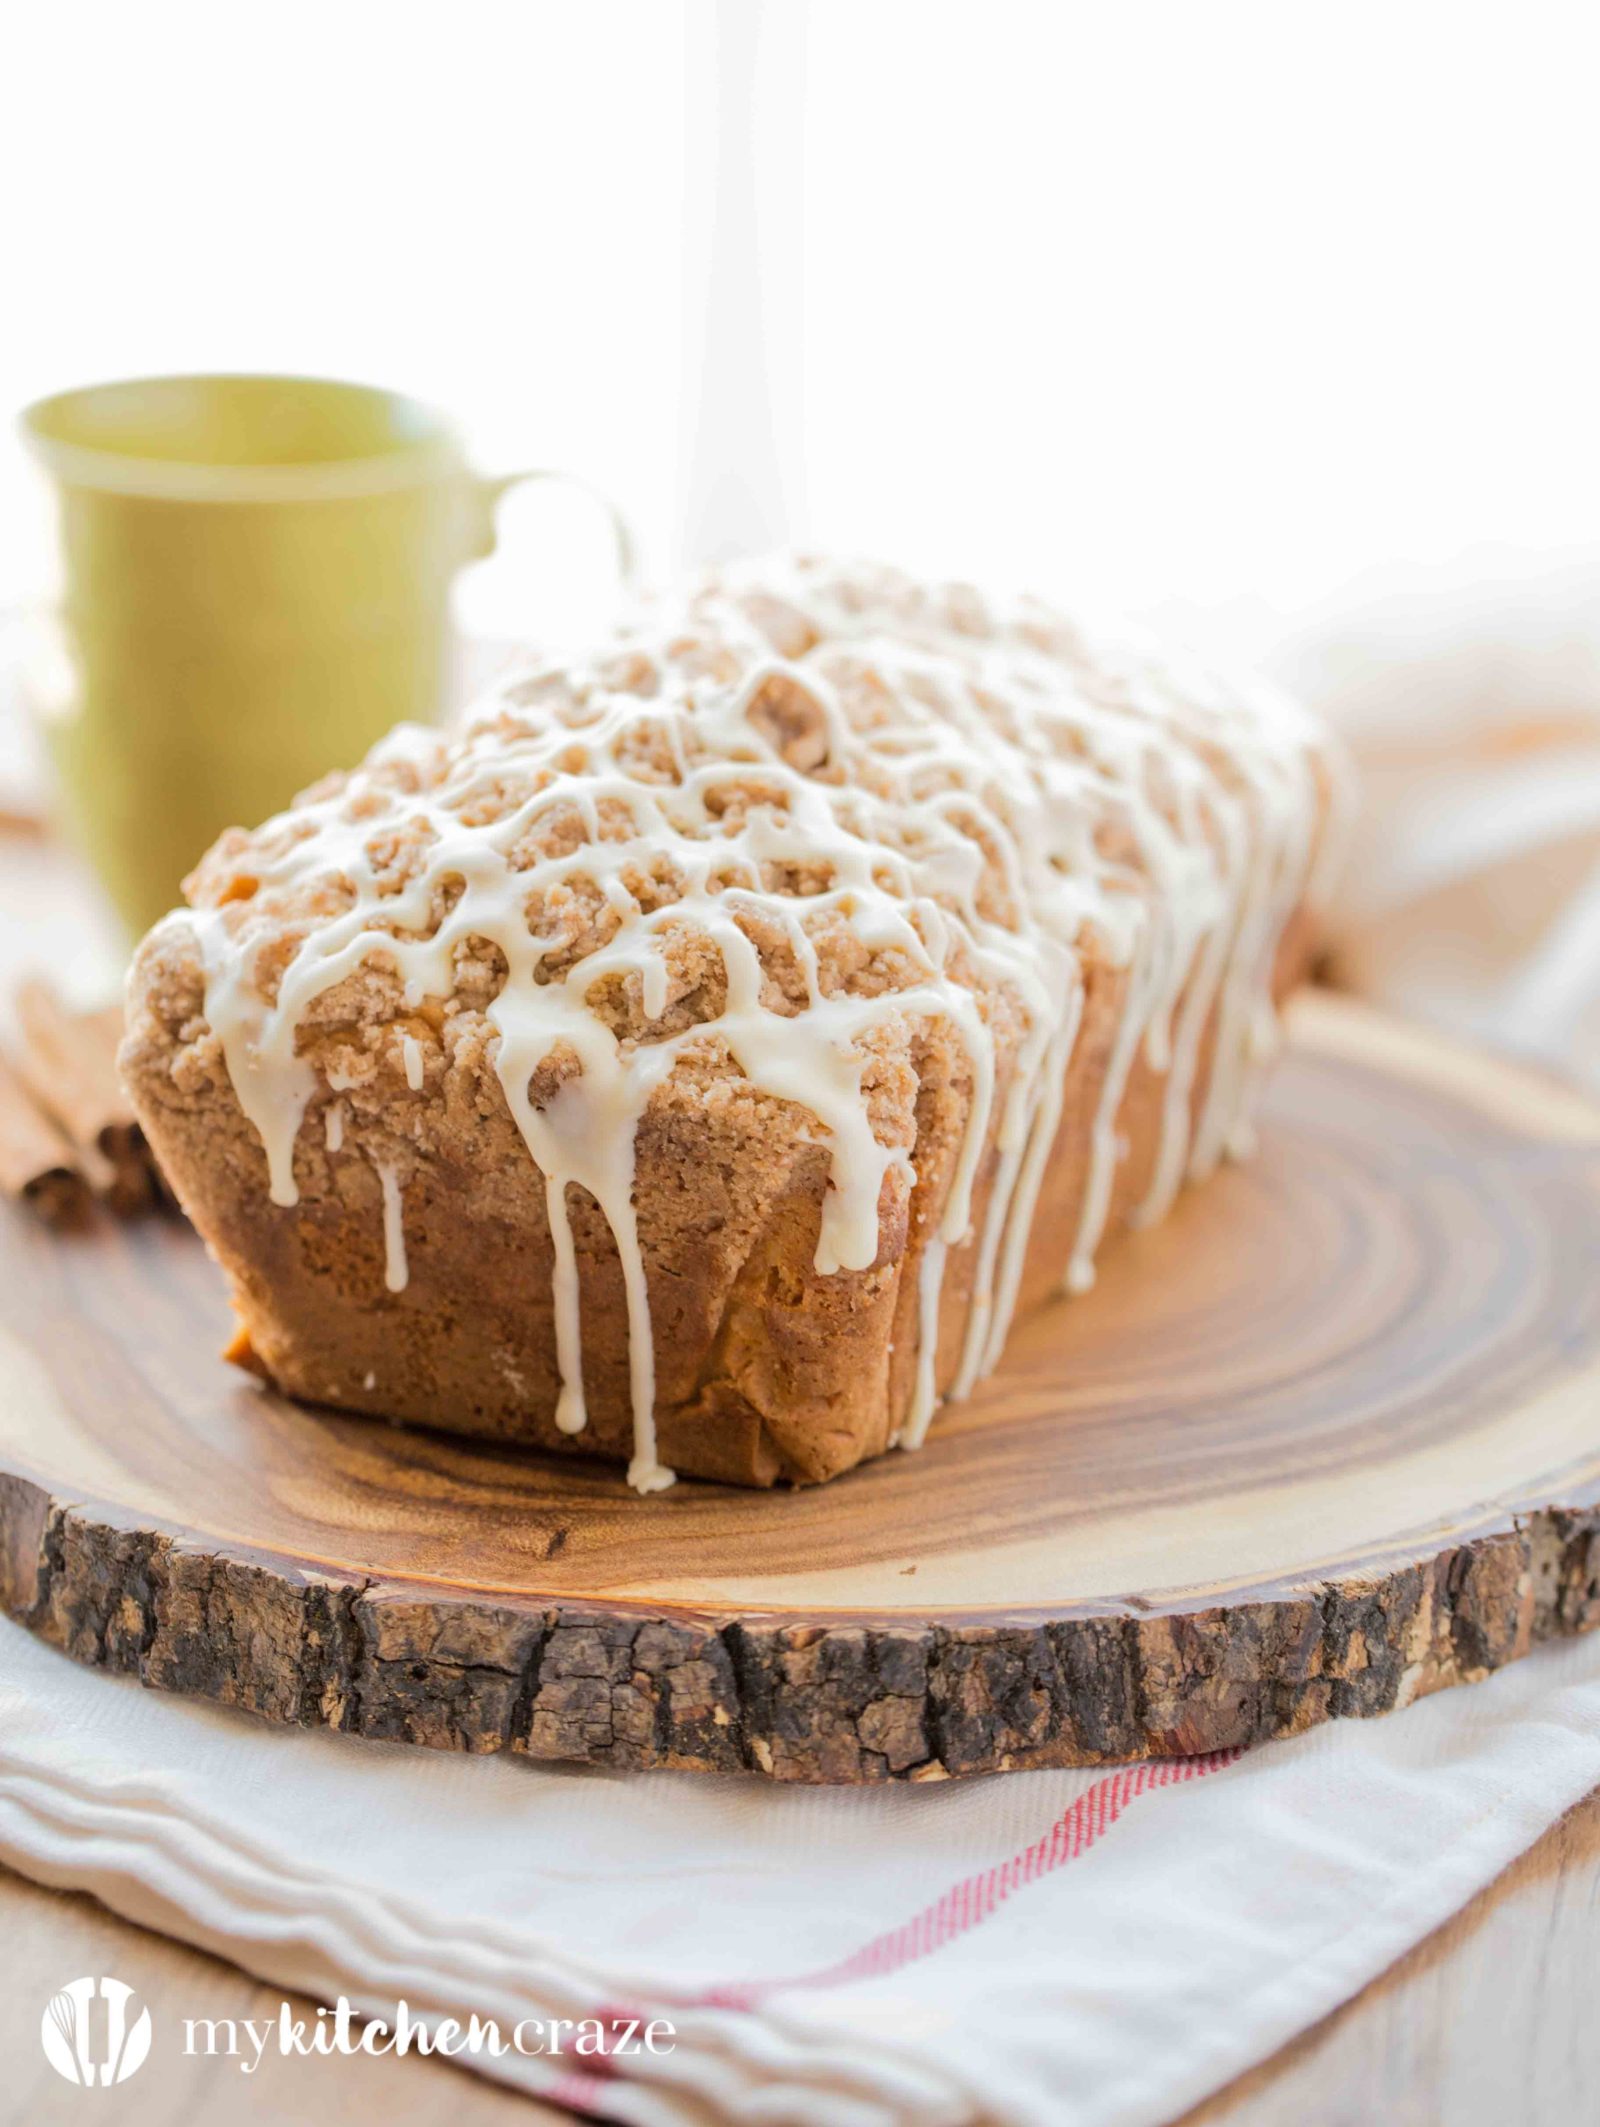 Eggnog Quick Bread should be on your holiday baking list this year! Moist and flavorful, this bread is a winner this season!